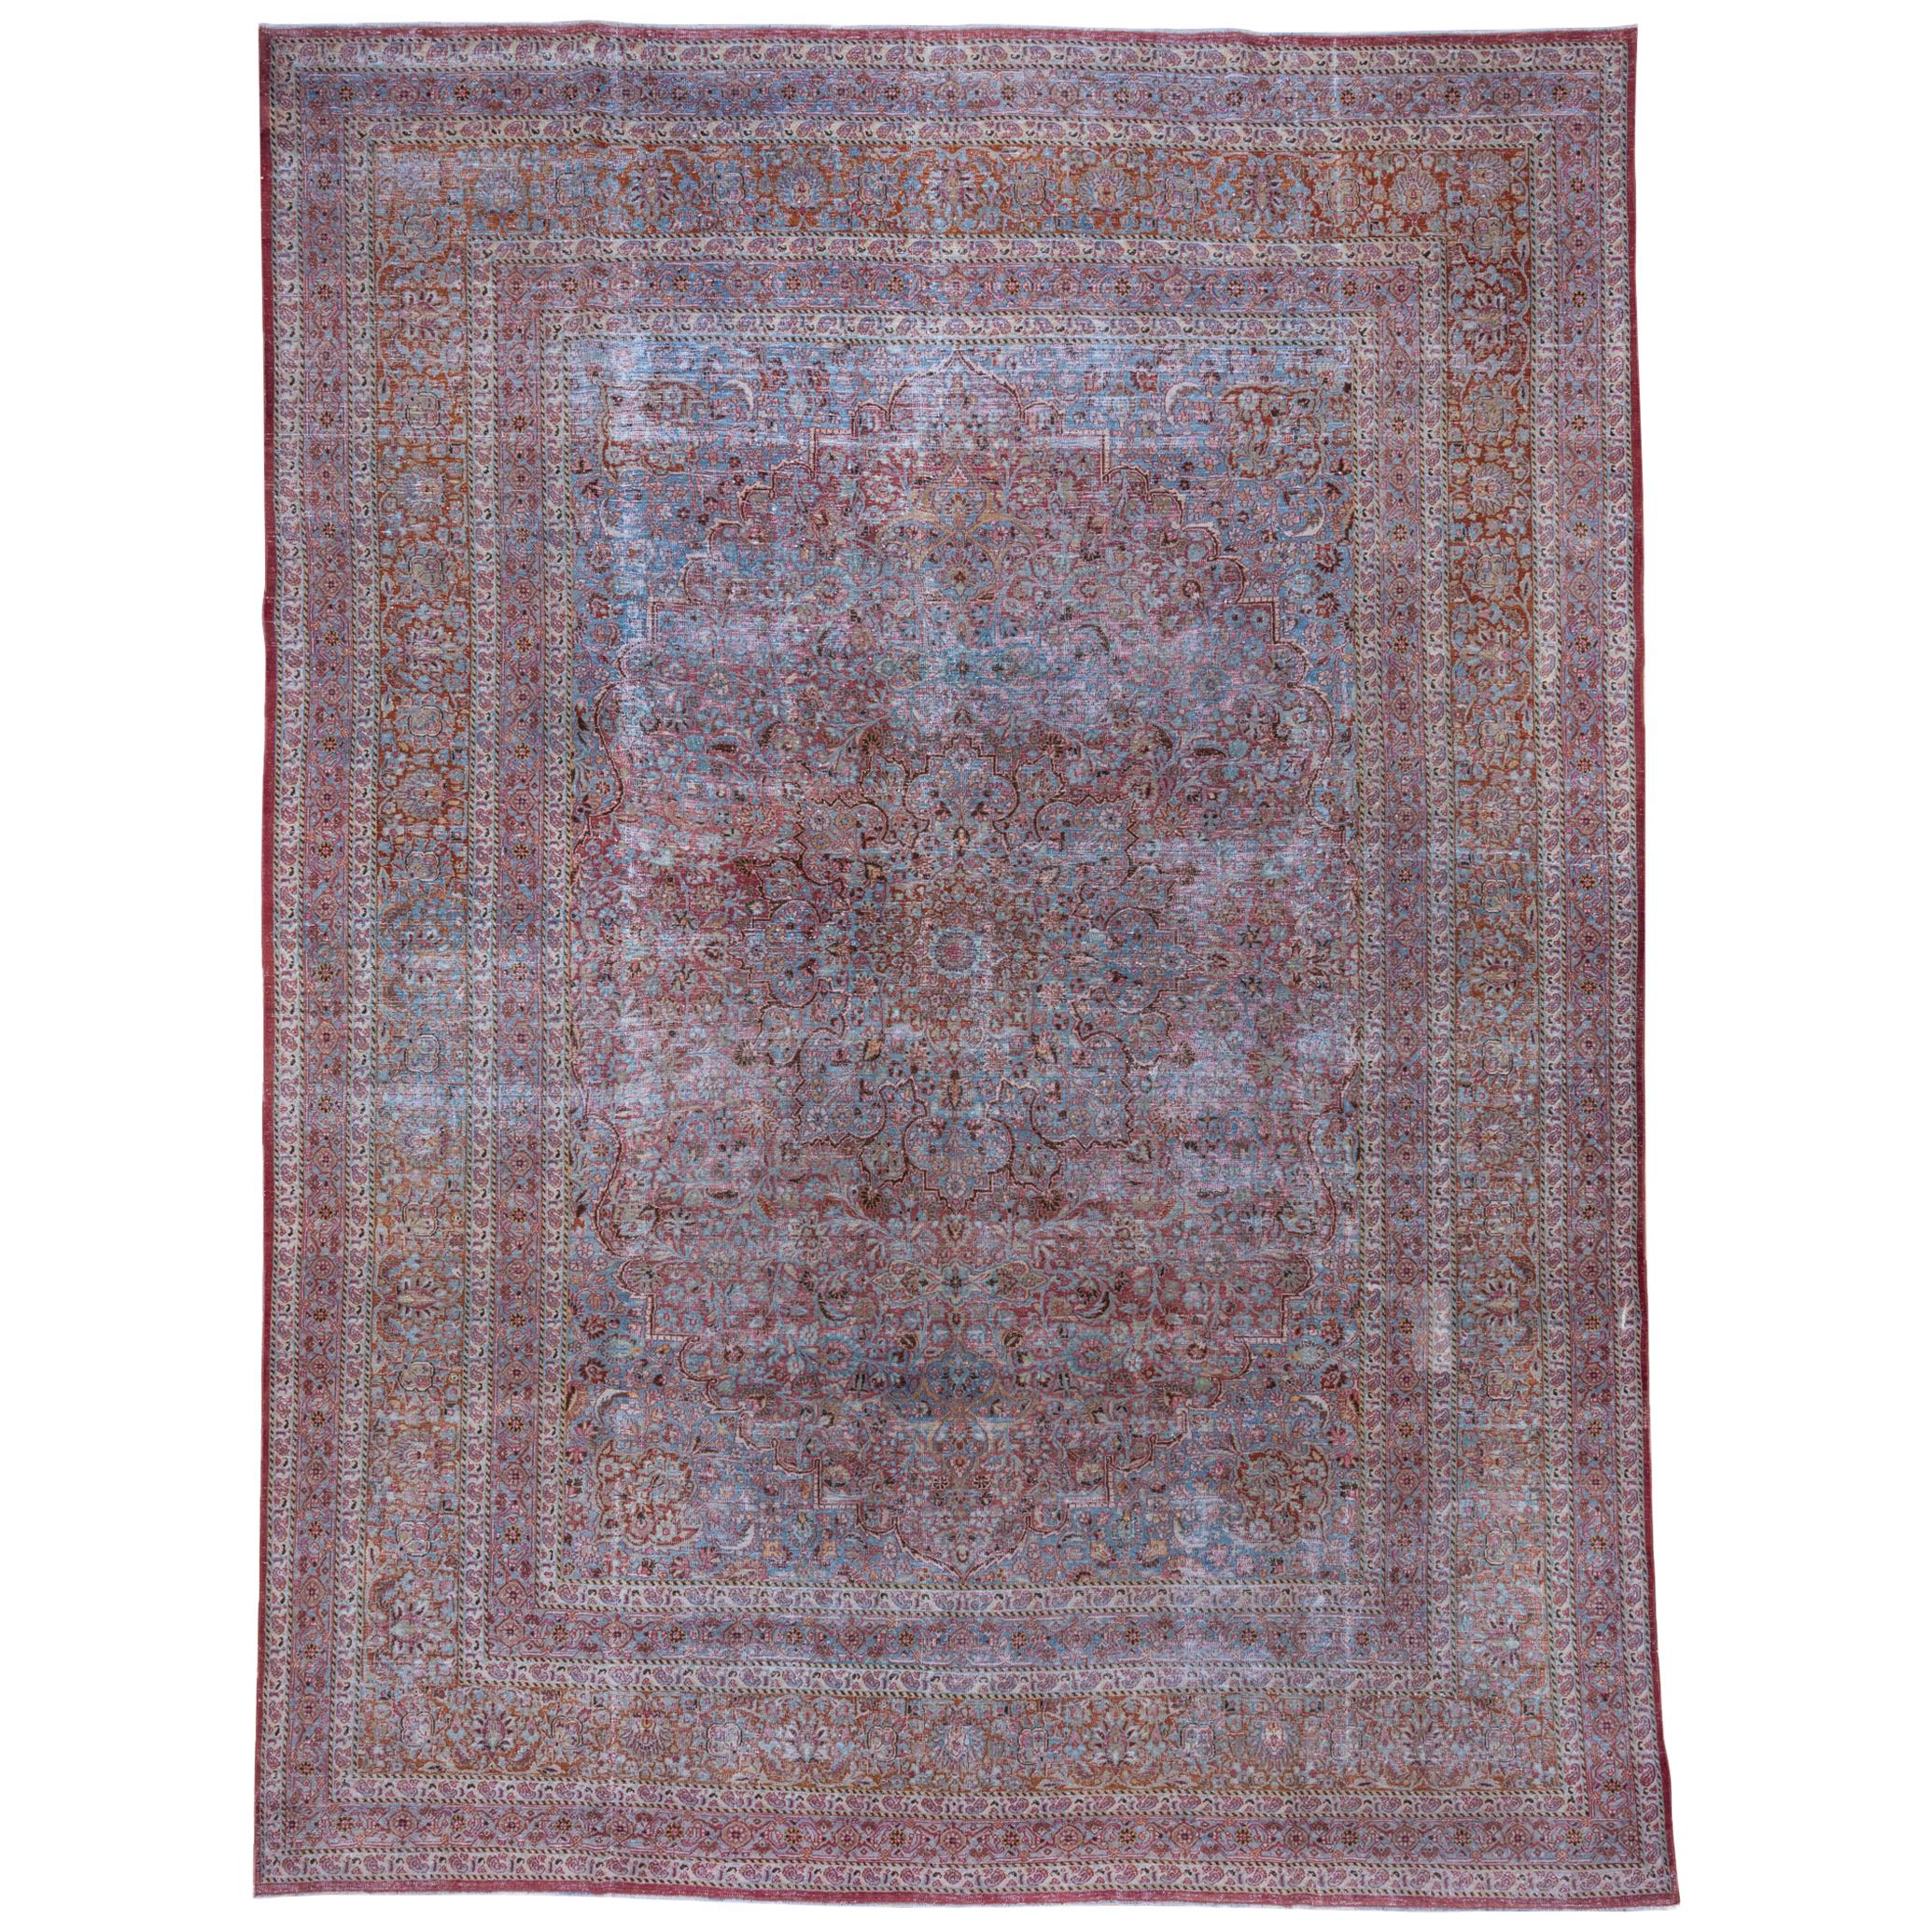 Colorful Antique Persian Khorassan Rug, Purple, Blue & Rust Accents, circa 1930s For Sale